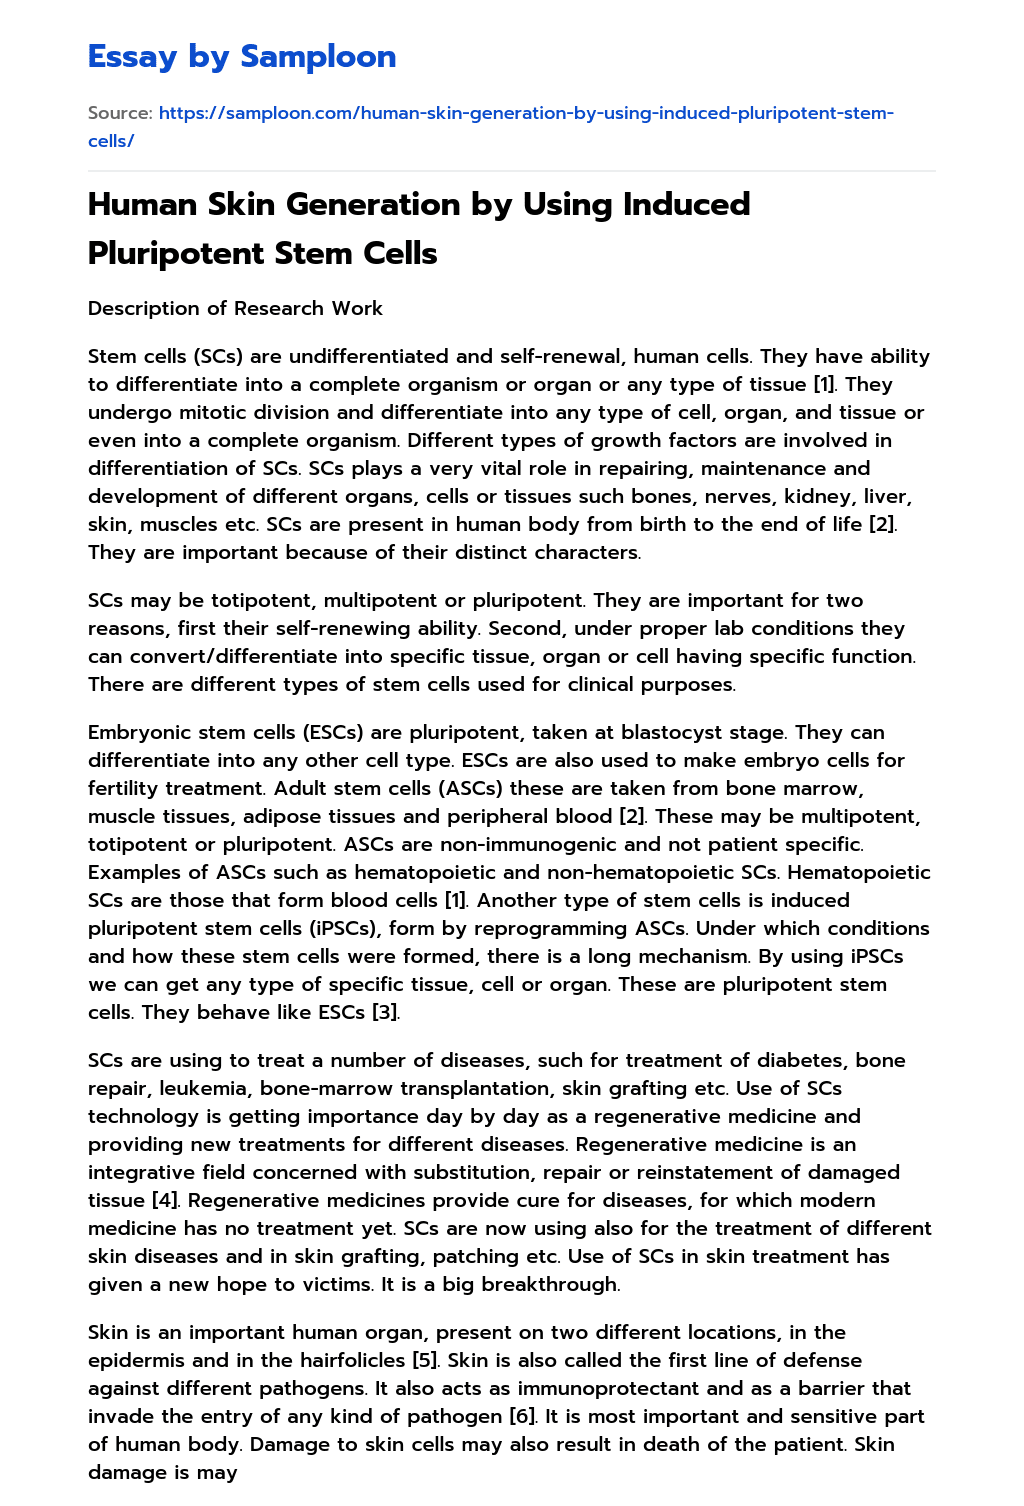 Human Skin Generation by Using Induced Pluripotent Stem Cells essay